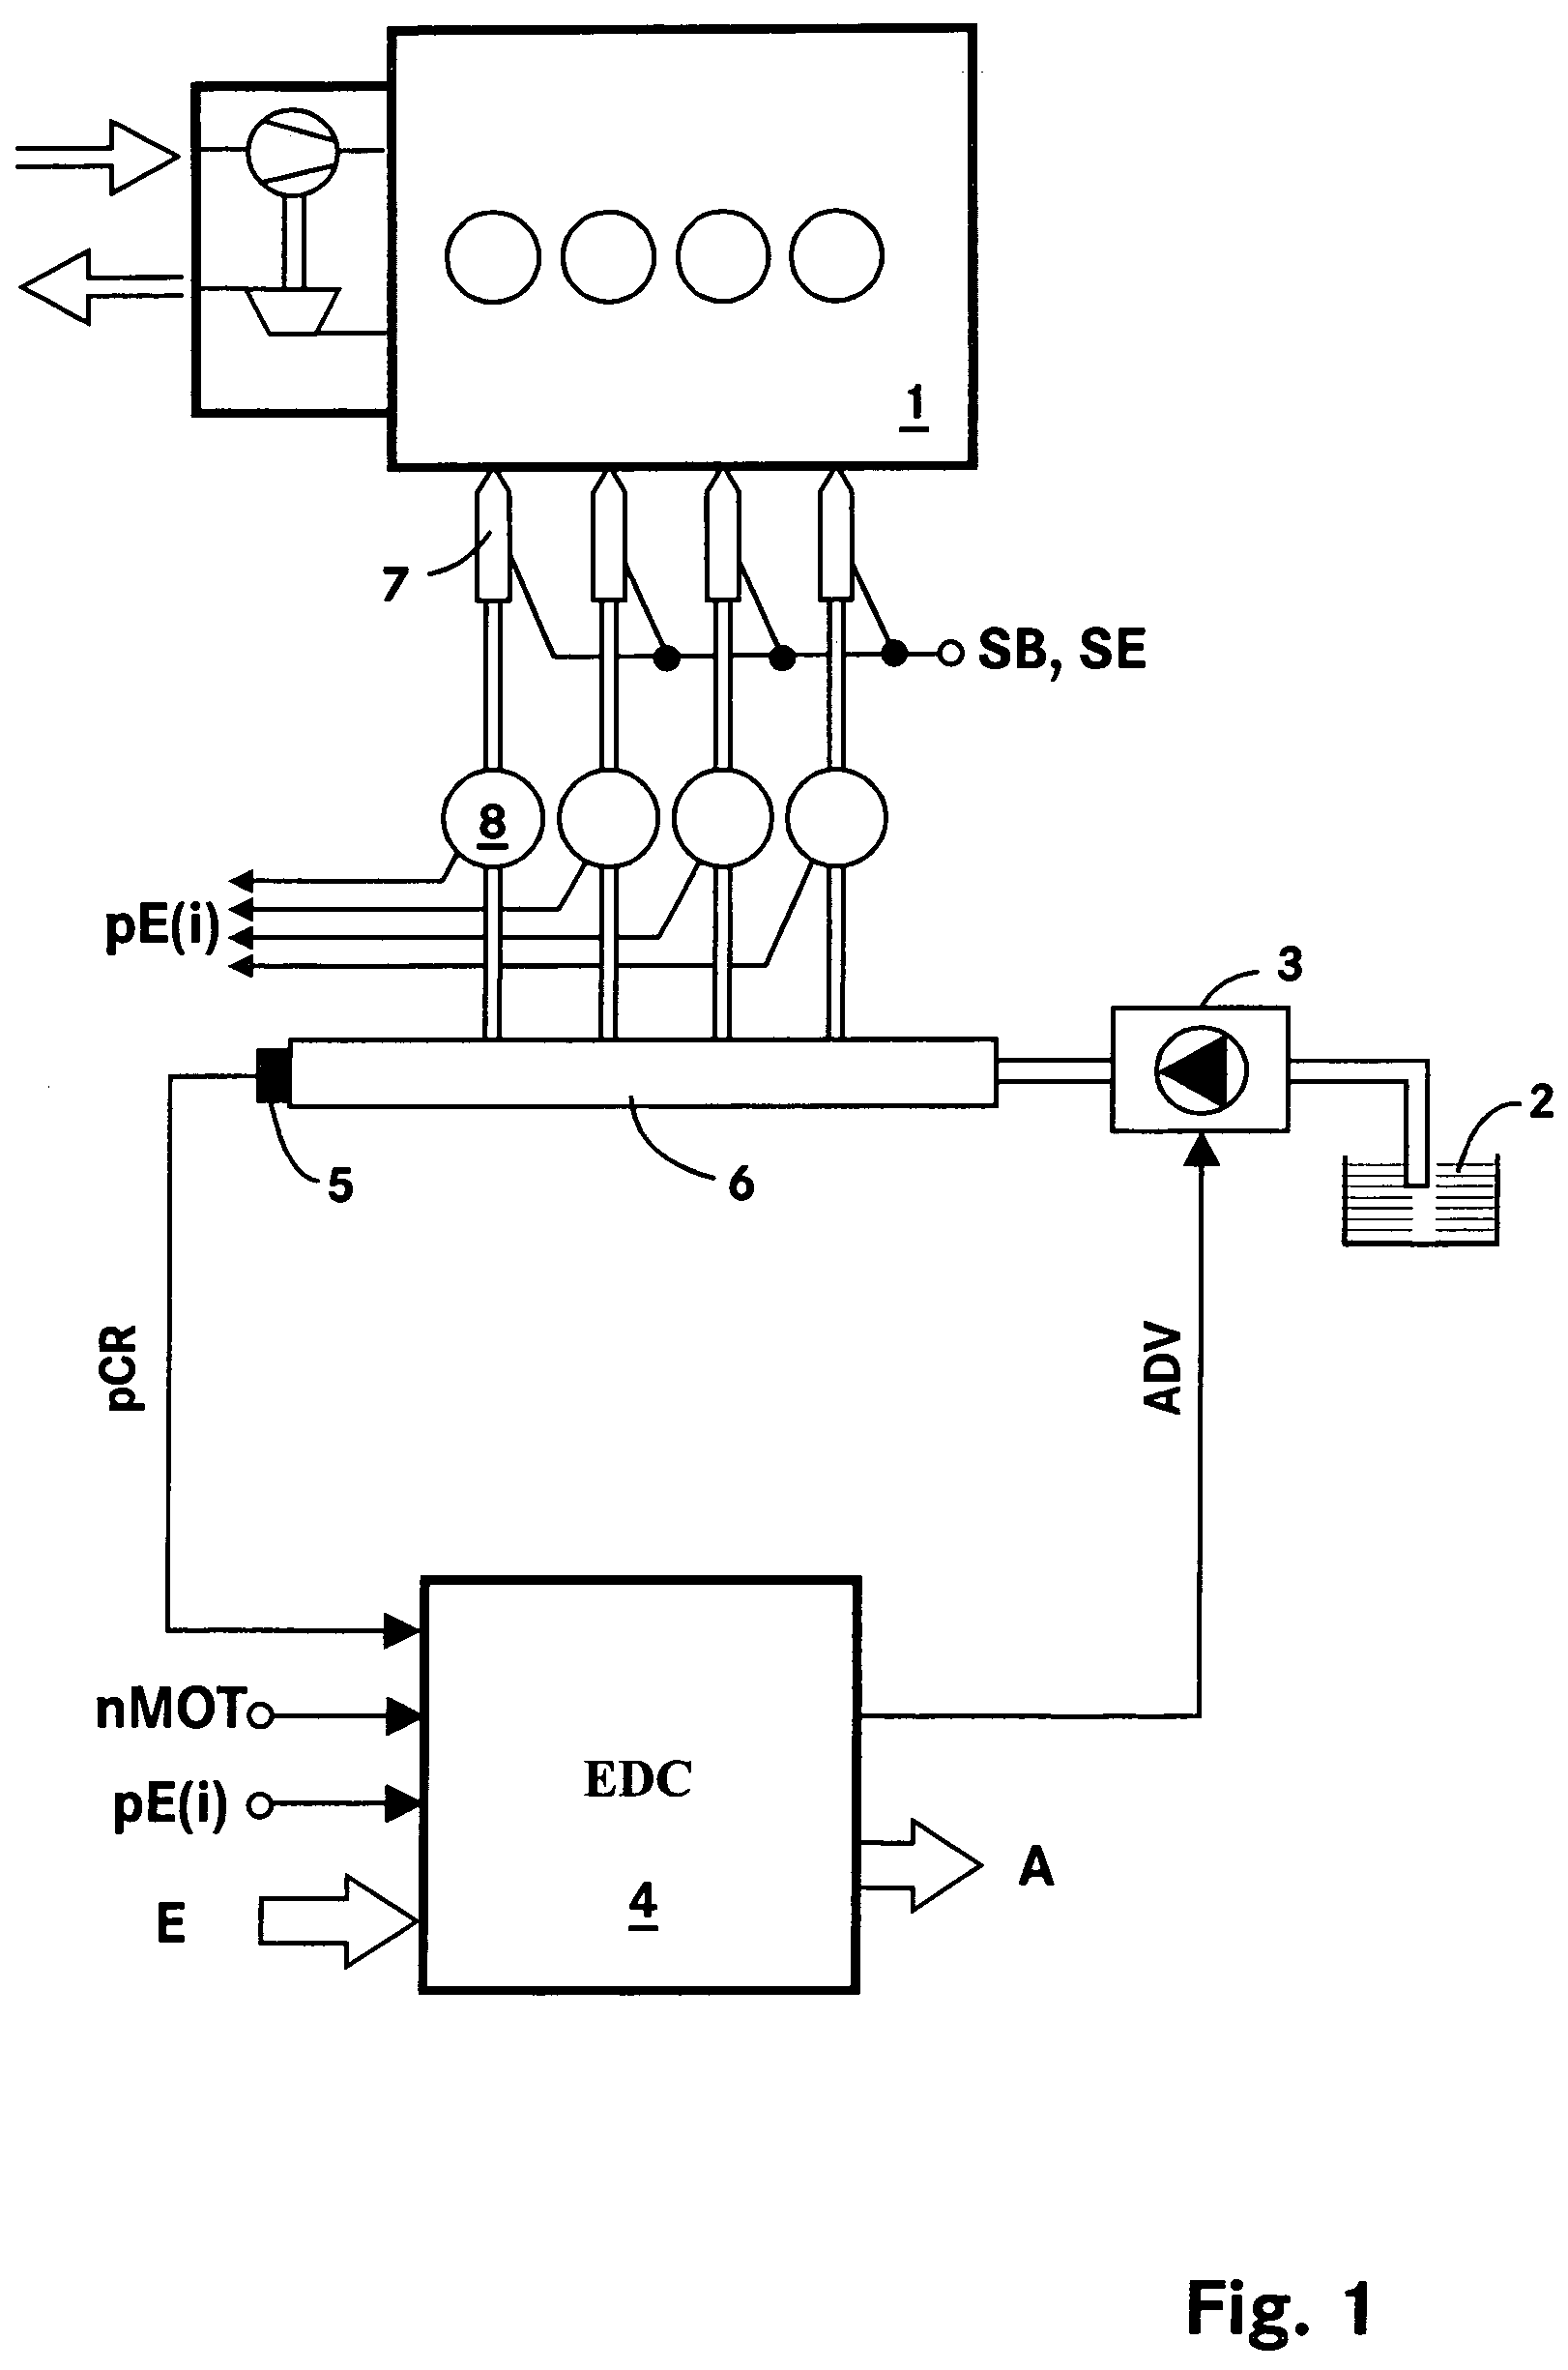 Method of controlling an internal combustion engine with a common rail fuel injection system